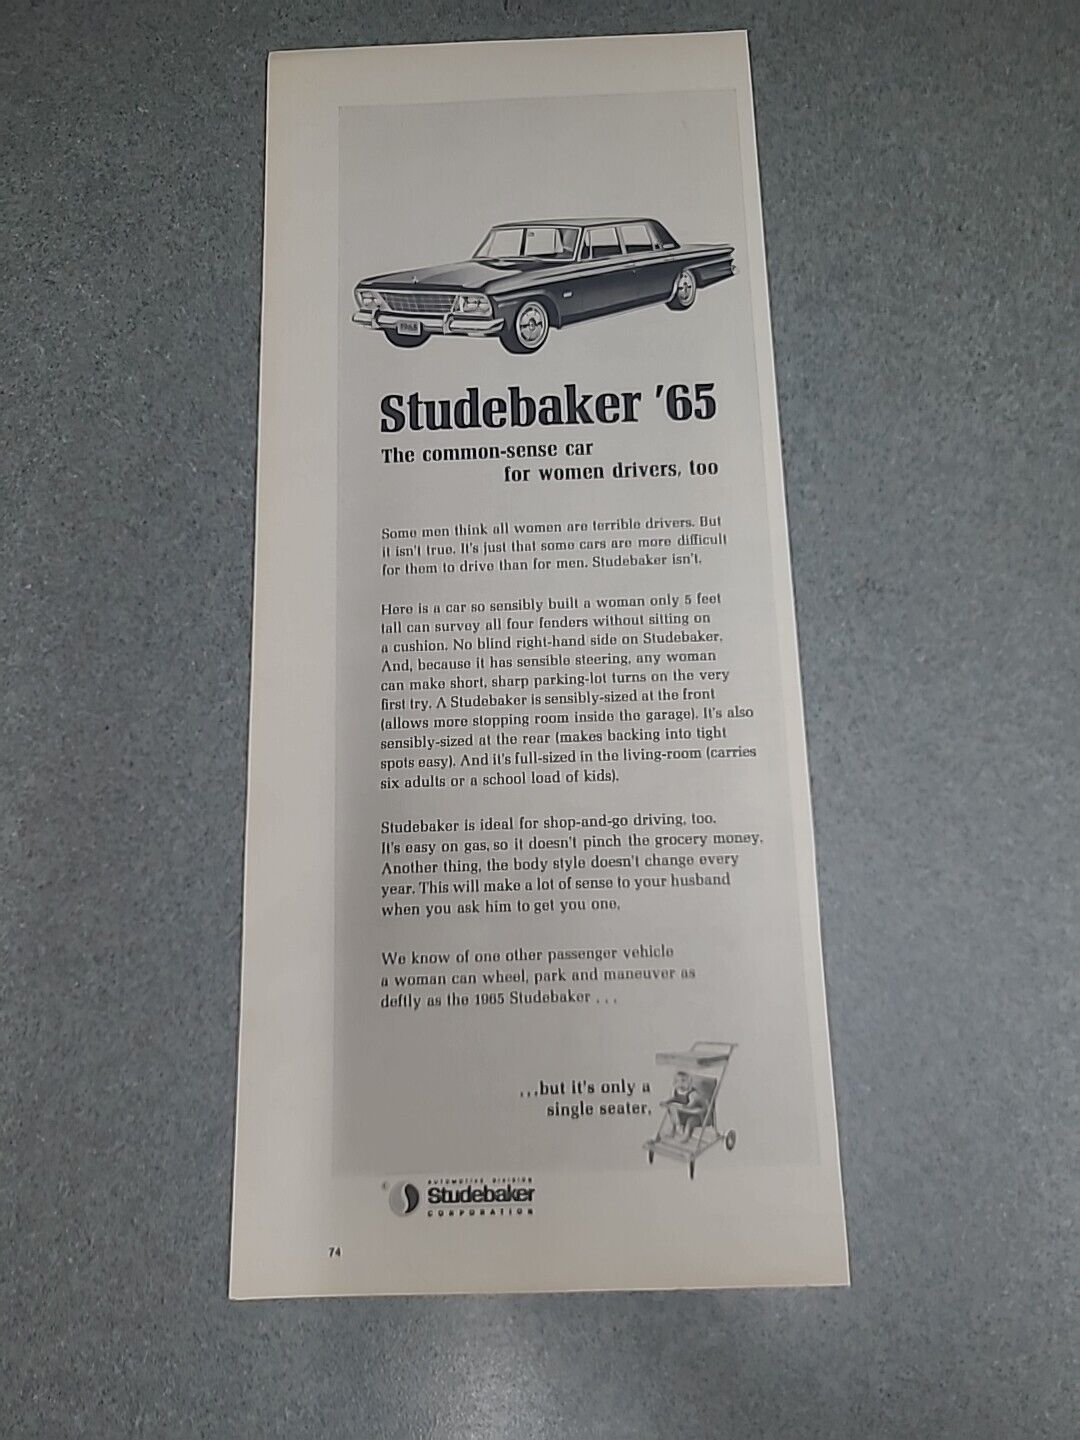 Studebaker \'65 Print Ad 1965 5x13 Great To Frame 